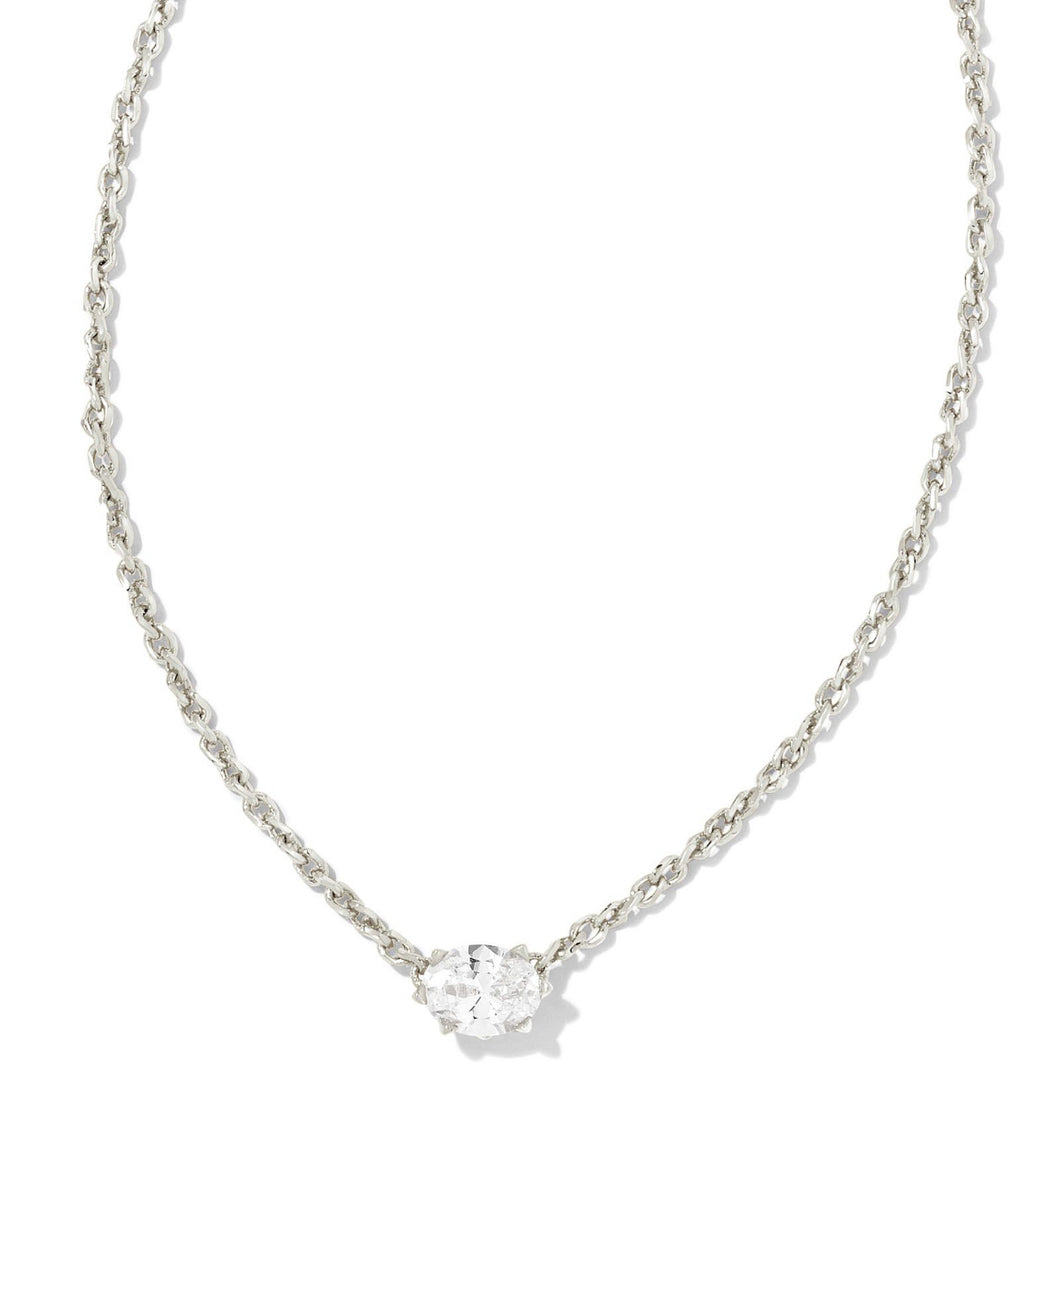 Kendra Scott: Cailin Silver Pendant Necklace in White Crystal